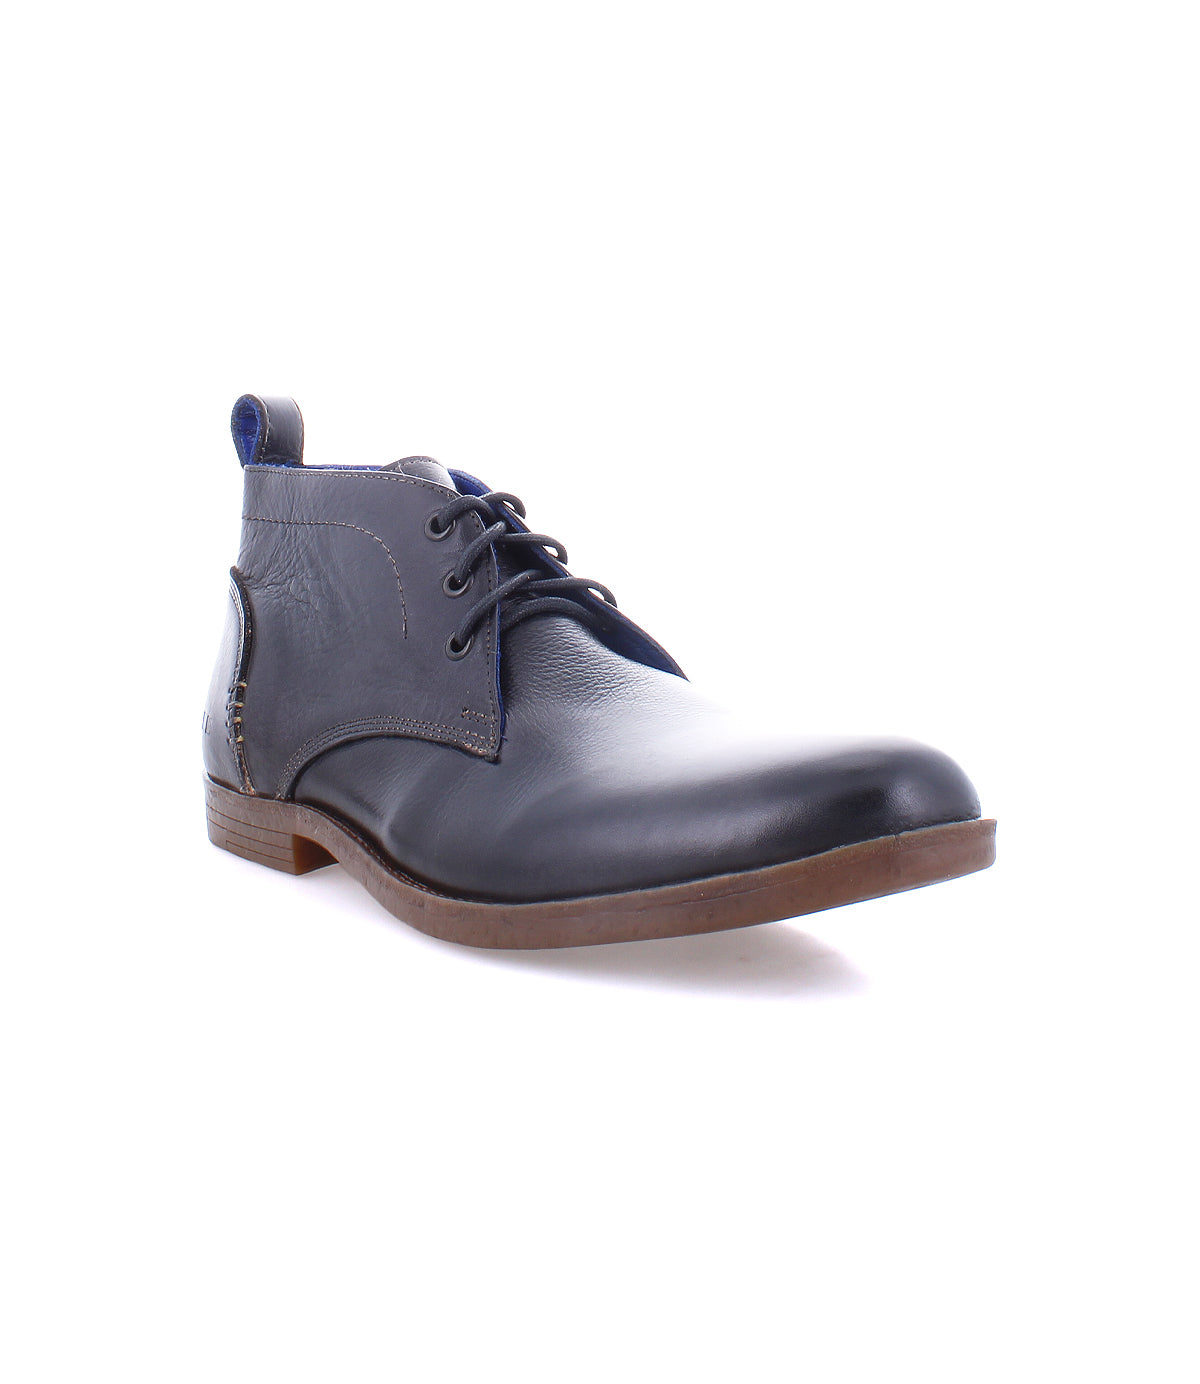 A single Illiad navy blue leather chukka boot with laces on a white background by Bed Stu.